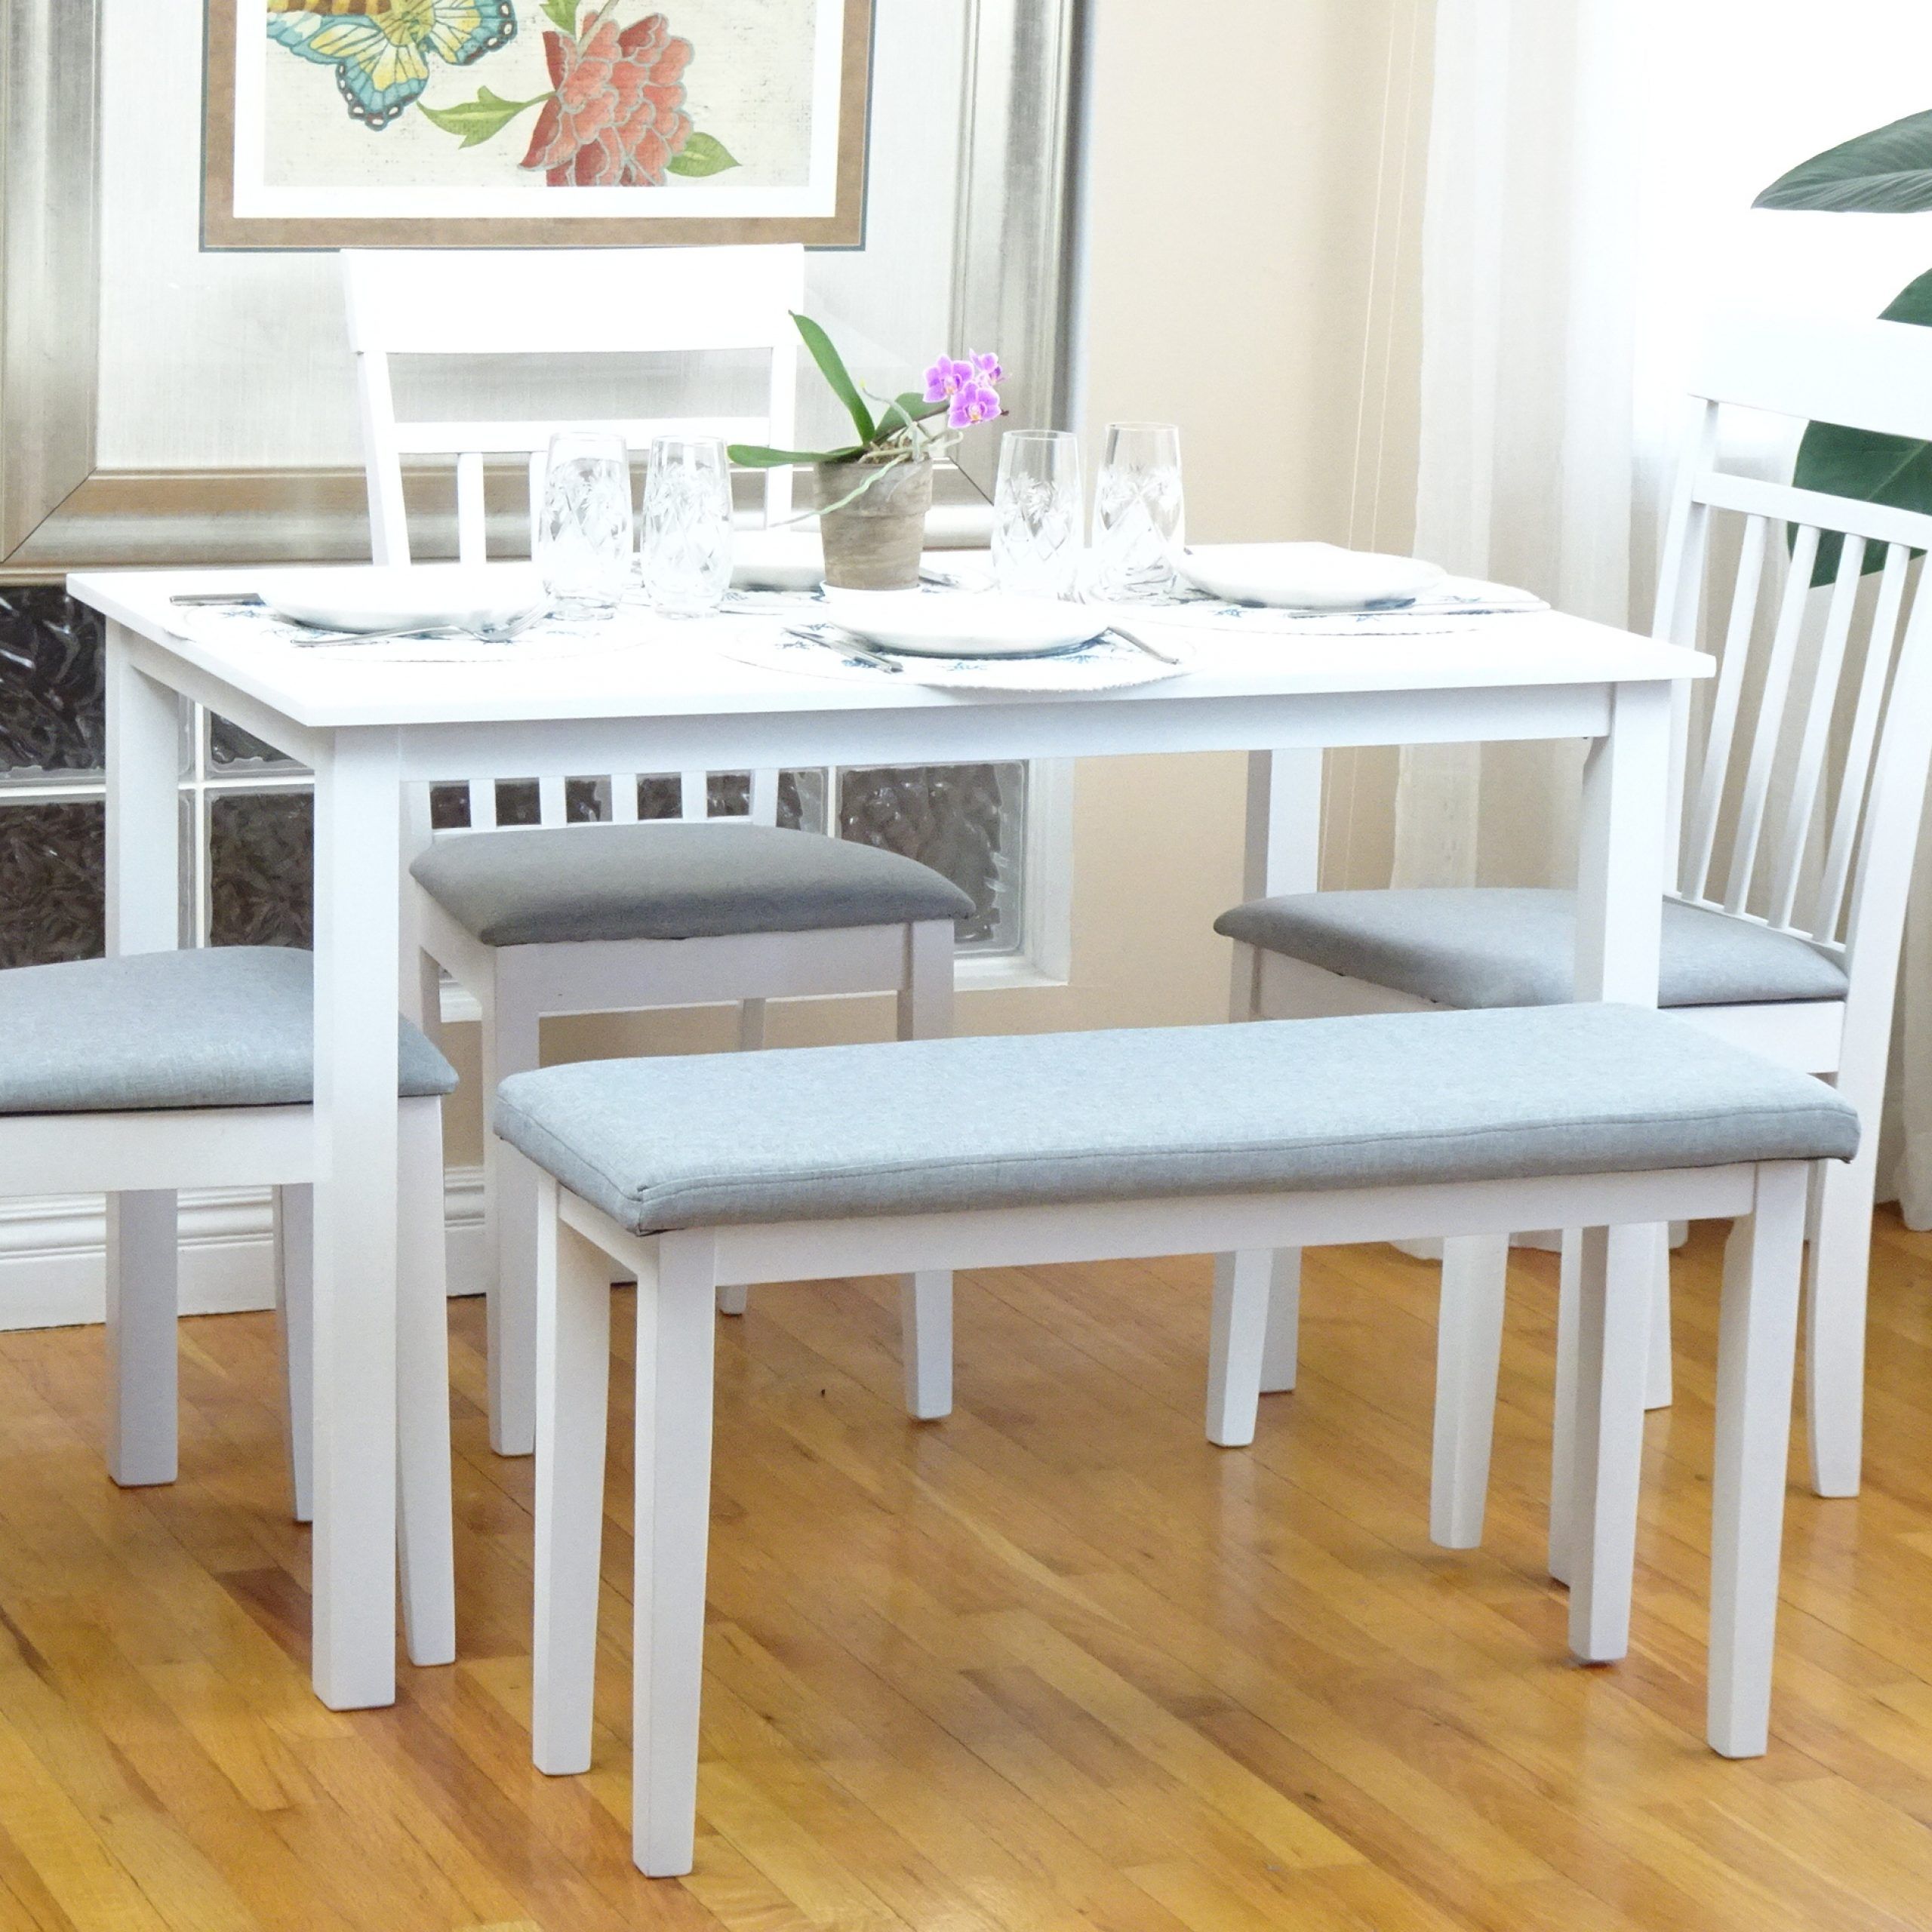 Most Popular 5 Pc Dining Kitchen Set Of Rectangular Table And 3 Chairs Throughout White Rectangular Dining Tables (View 3 of 20)